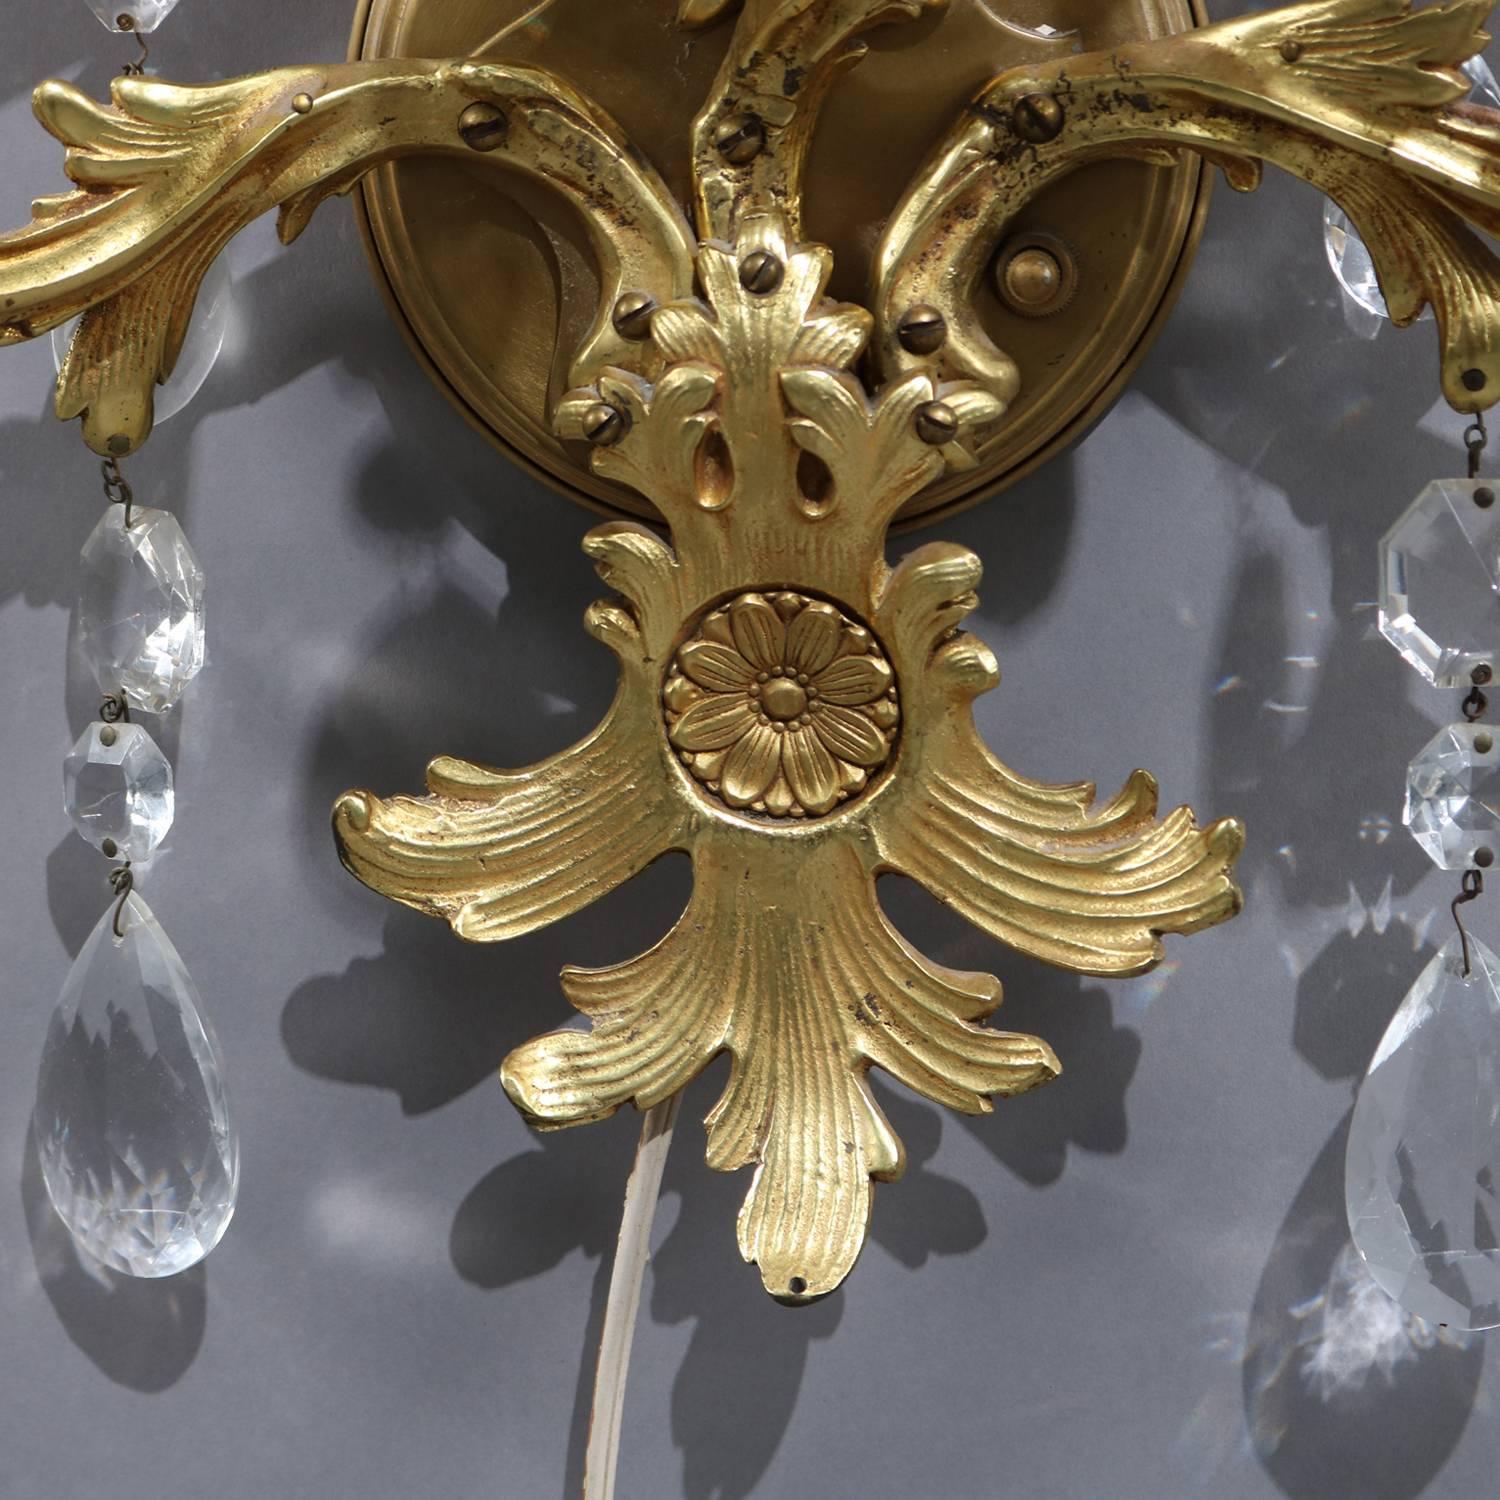 Oversized French Rococo Foliate Form Gilt Bronze Cut Crystal Wall Sconces 2